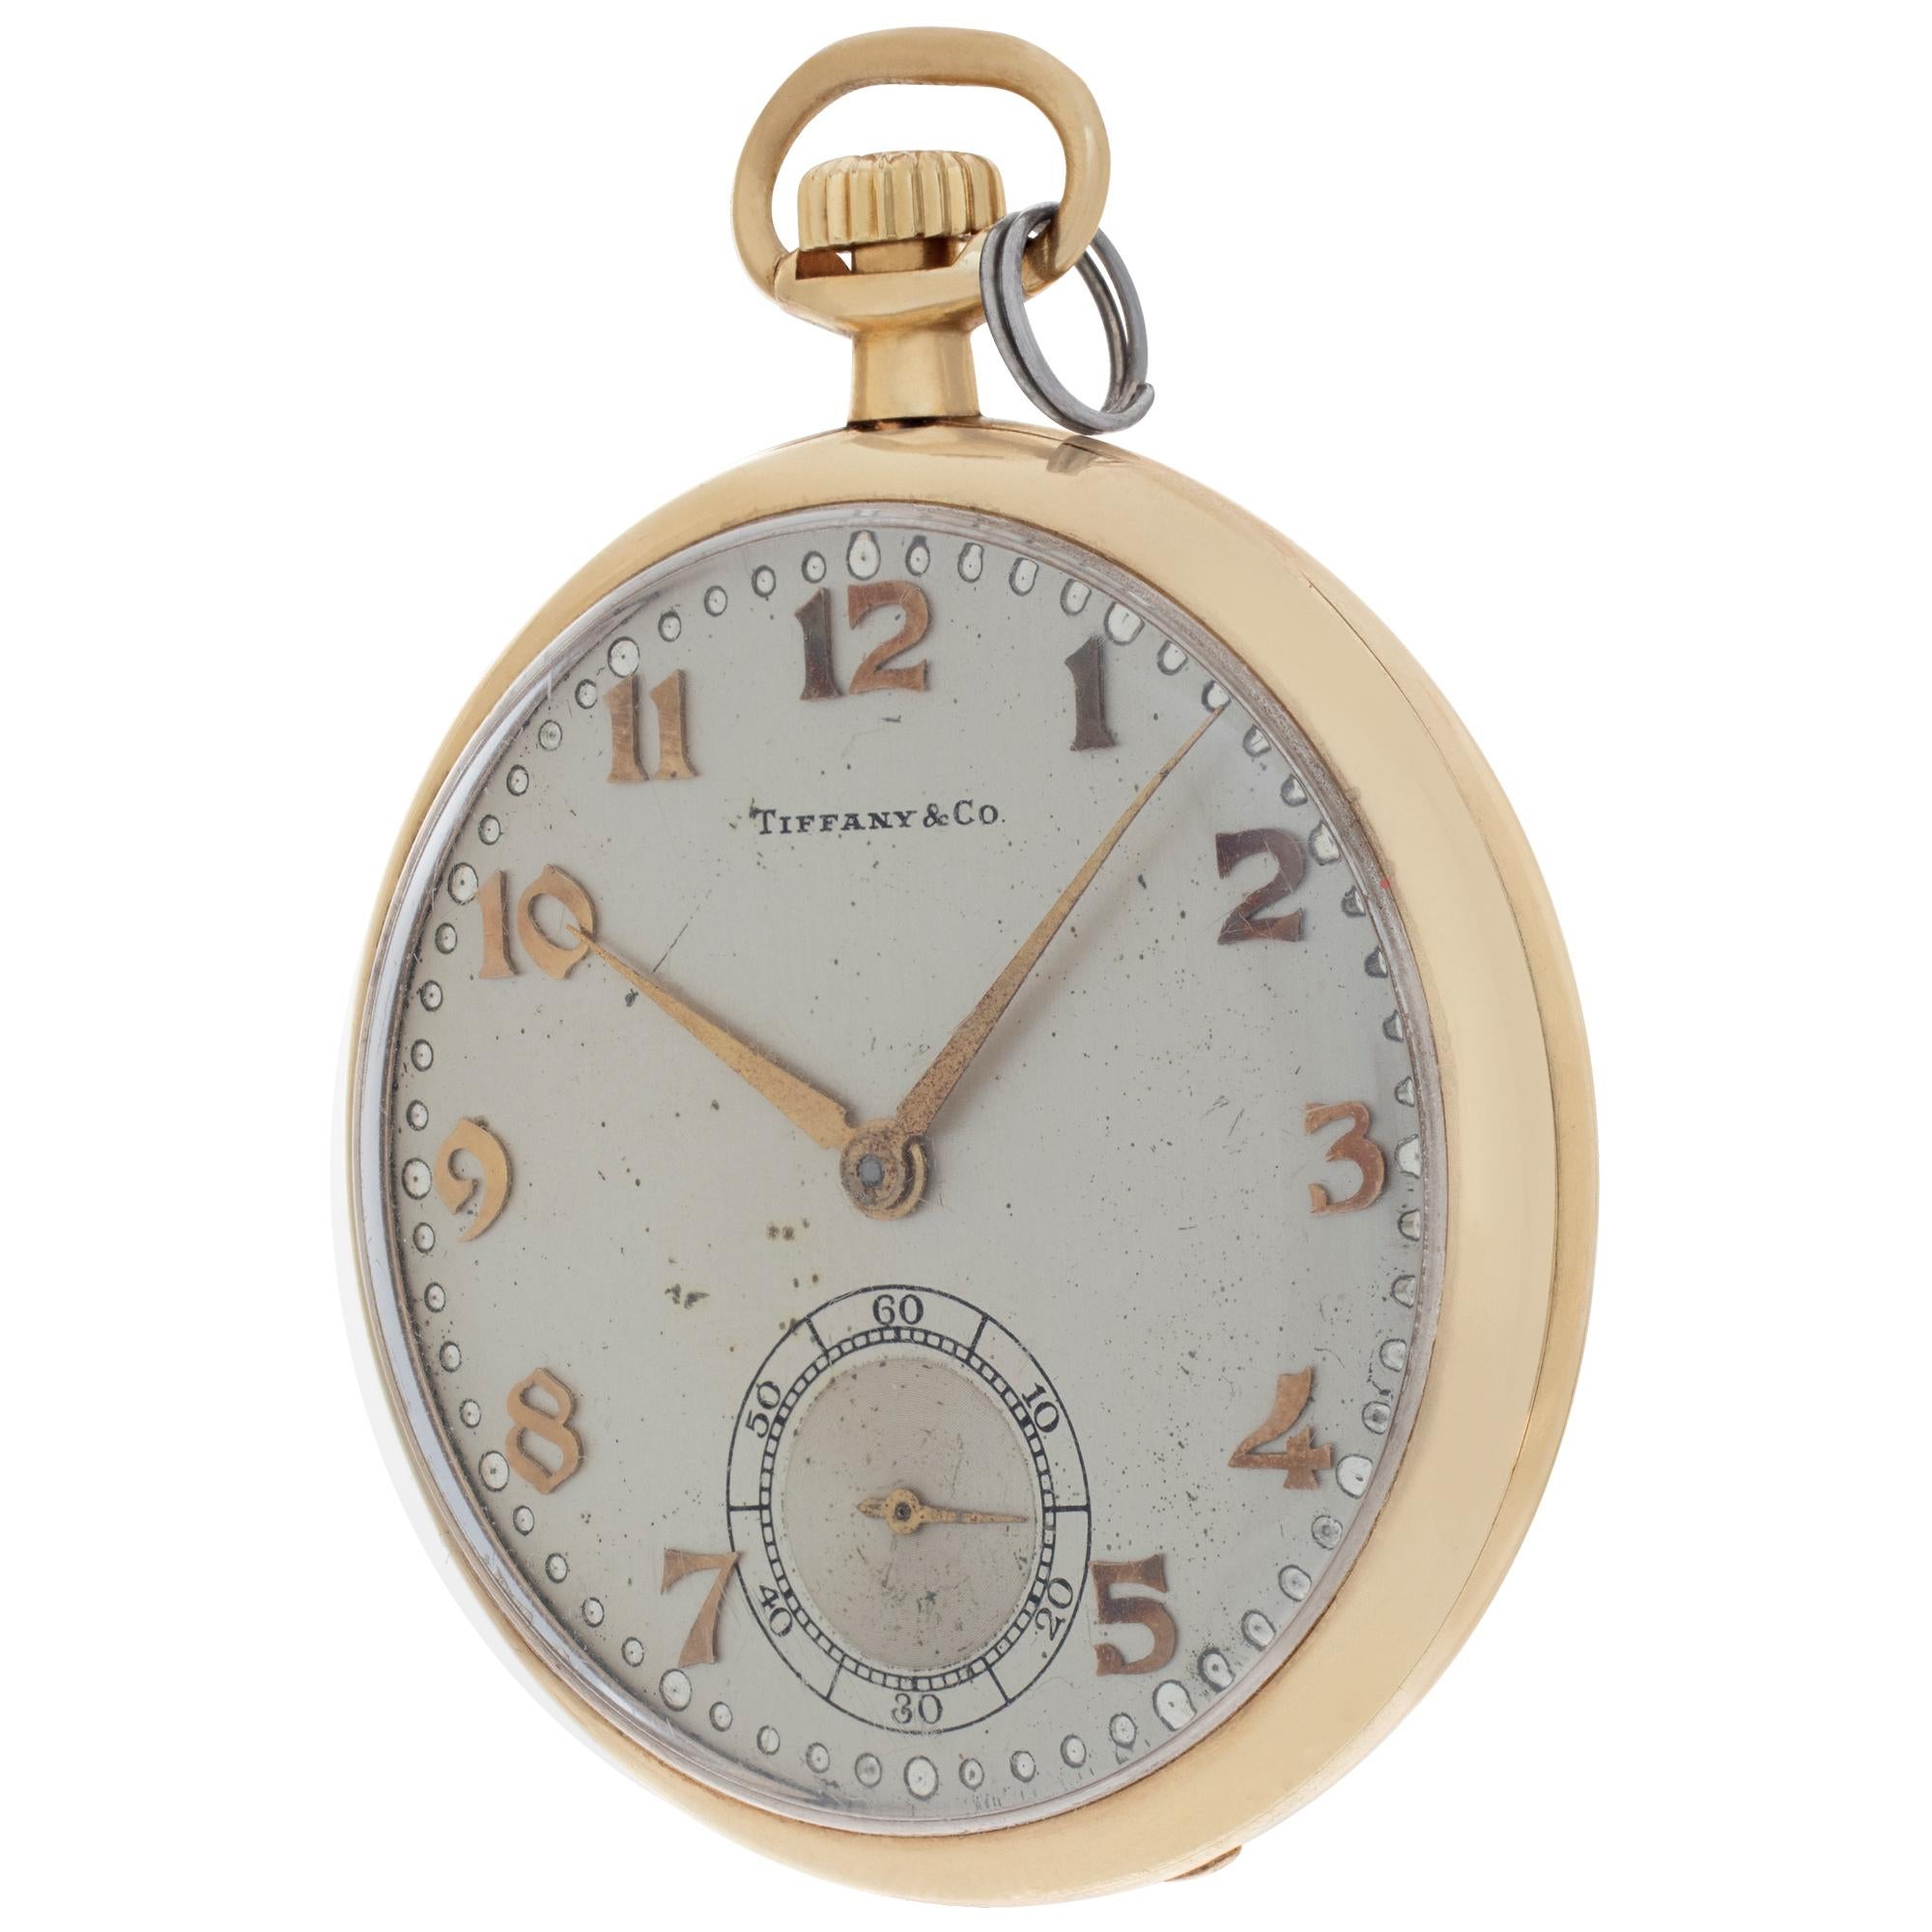 Hamilton retailed by Tiffany & Co. in 14k yellow gold. Made in the USA.  Manual w/ subseconds. Crica 1920. Fine Pre-owned Tiffany & Co. Watch. Certified preowned Vintage Tiffany & Co. pocket watch watch is made out of yellow gold. This Tiffany & Co.